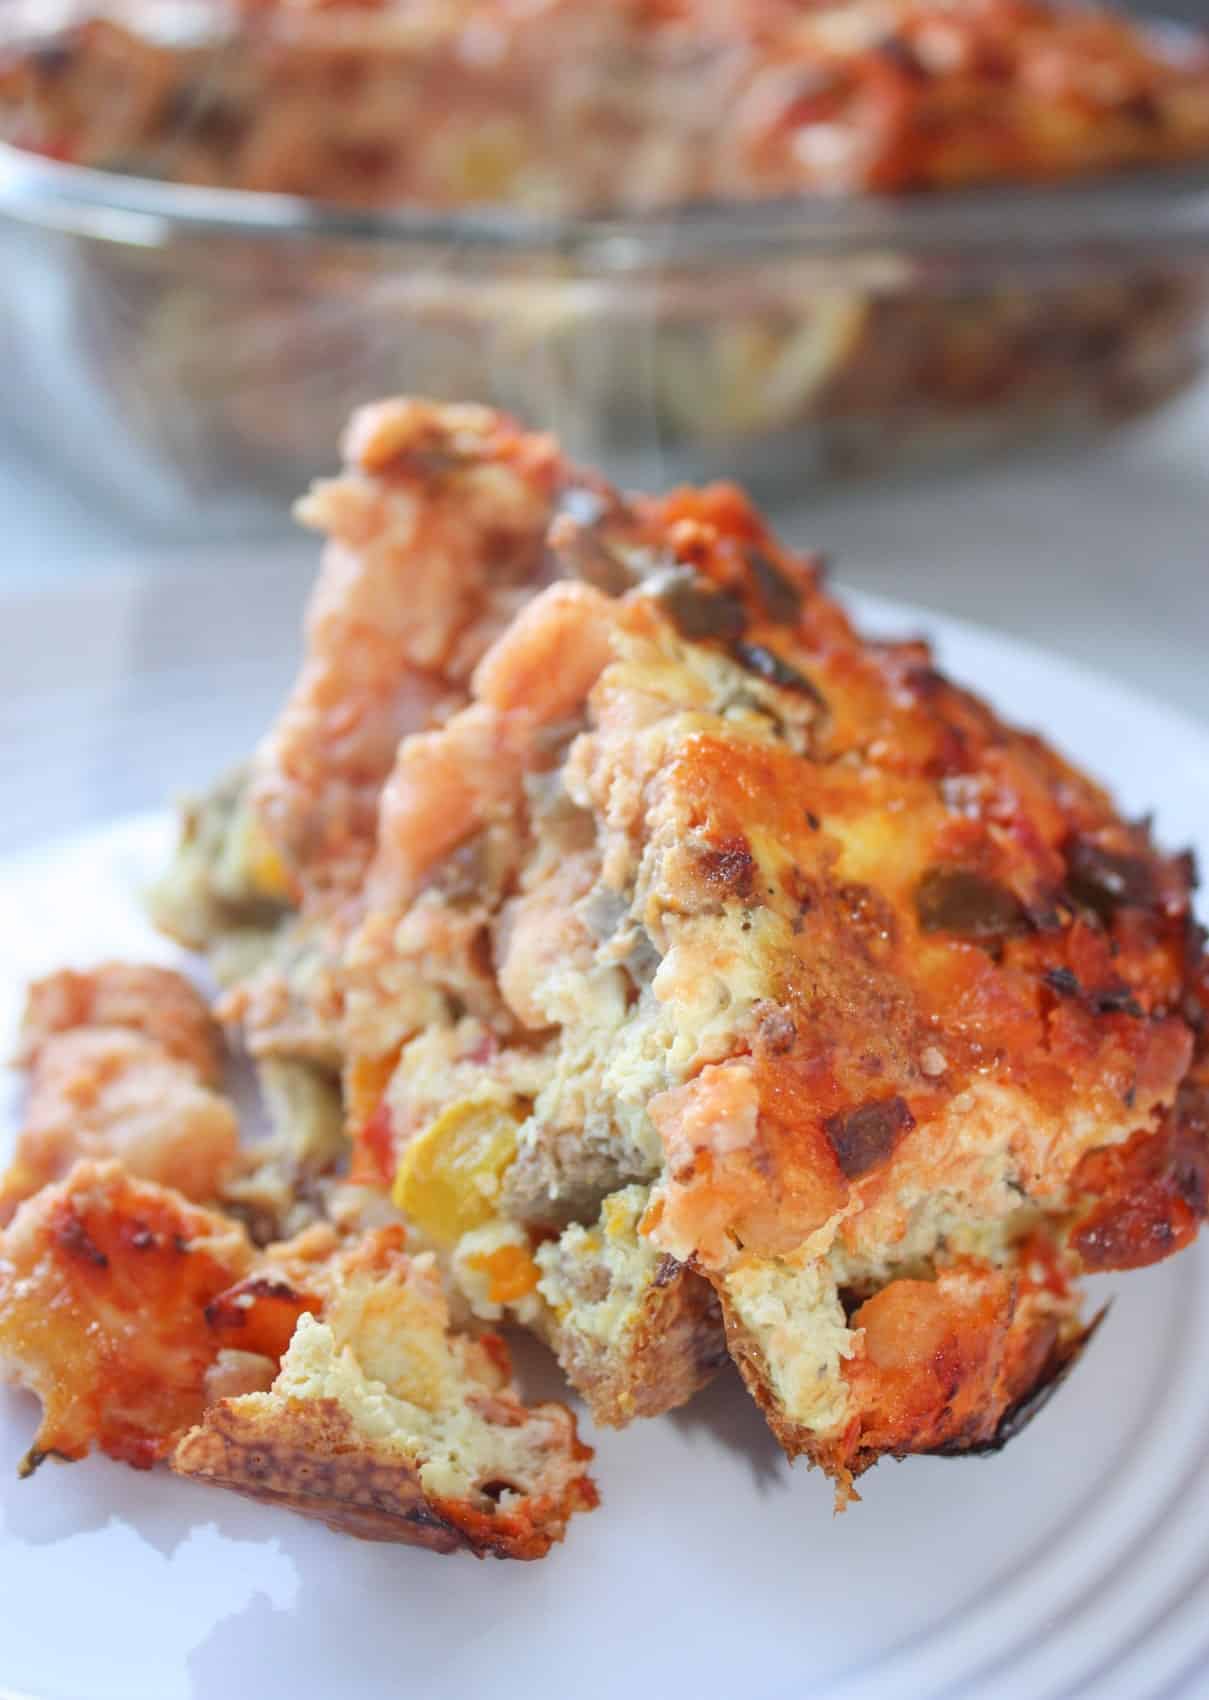 Loaded Breakfast Casserole is a hearty breakfast or brunch option that is loaded with flavour and goodness.  Serve it paired with a fruit salad for a complete meal.